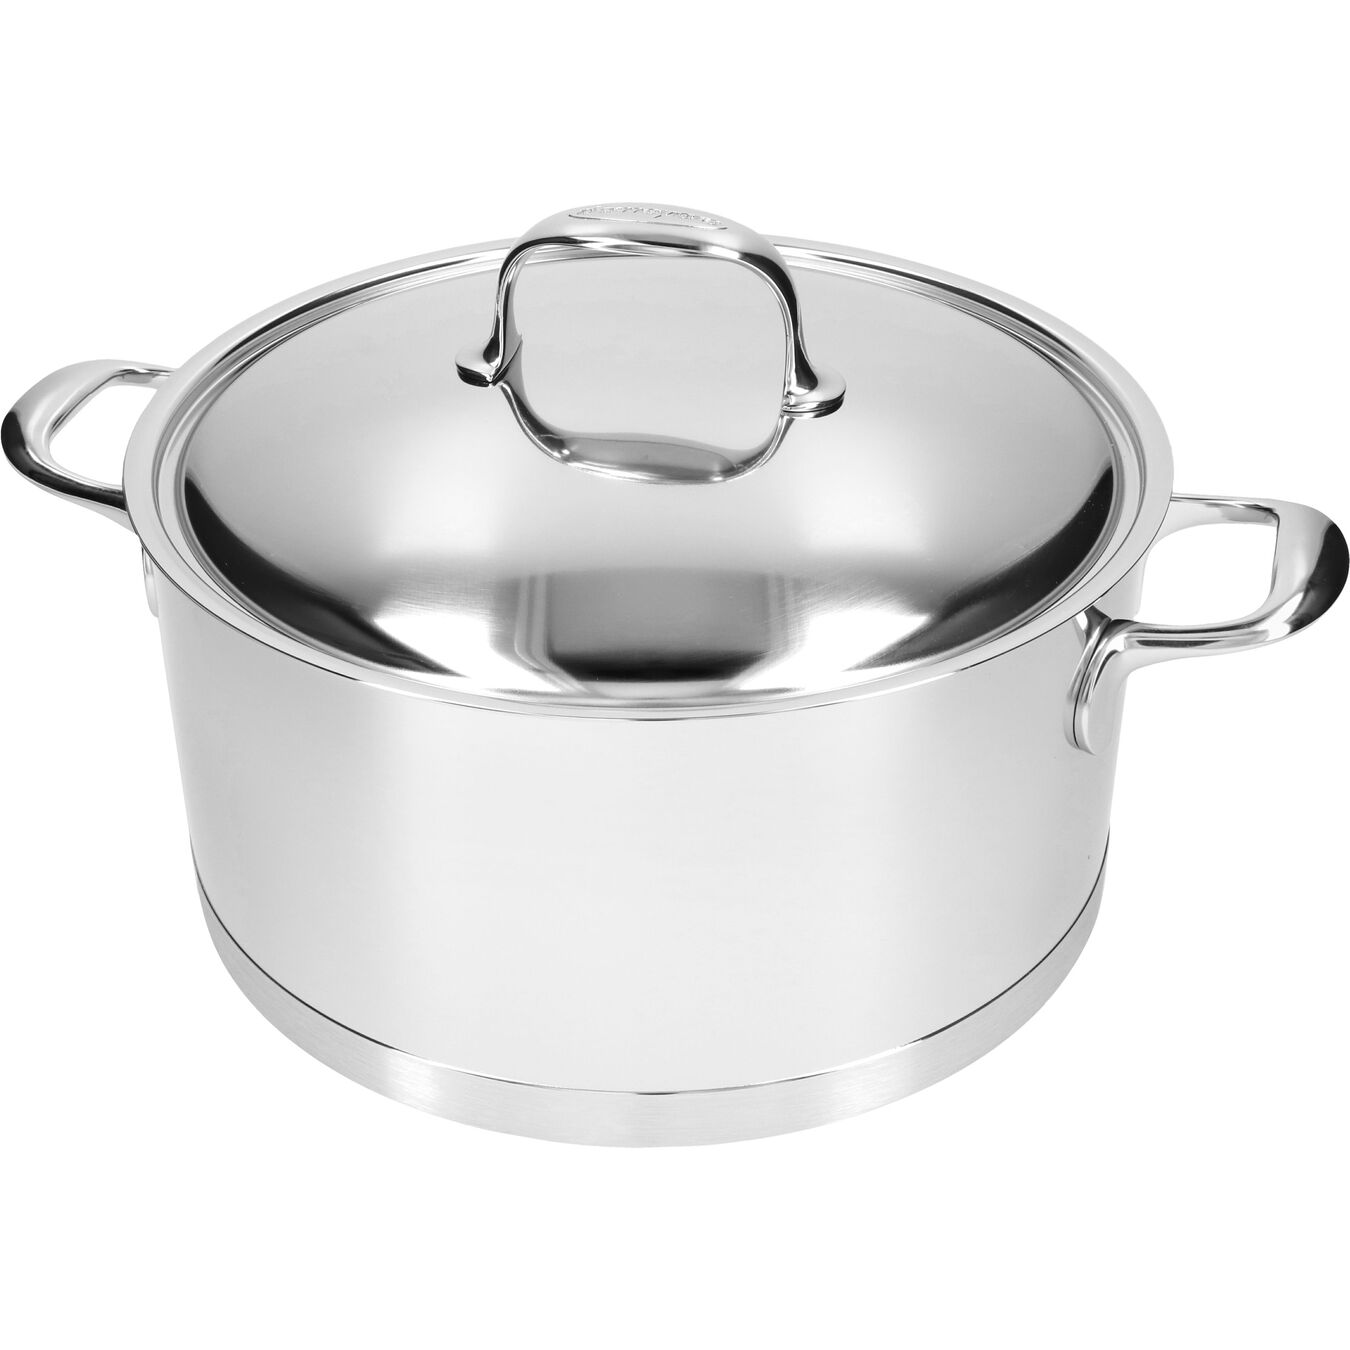 28 cm 18/10 Stainless Steel Stew pot with lid silver,,large 6